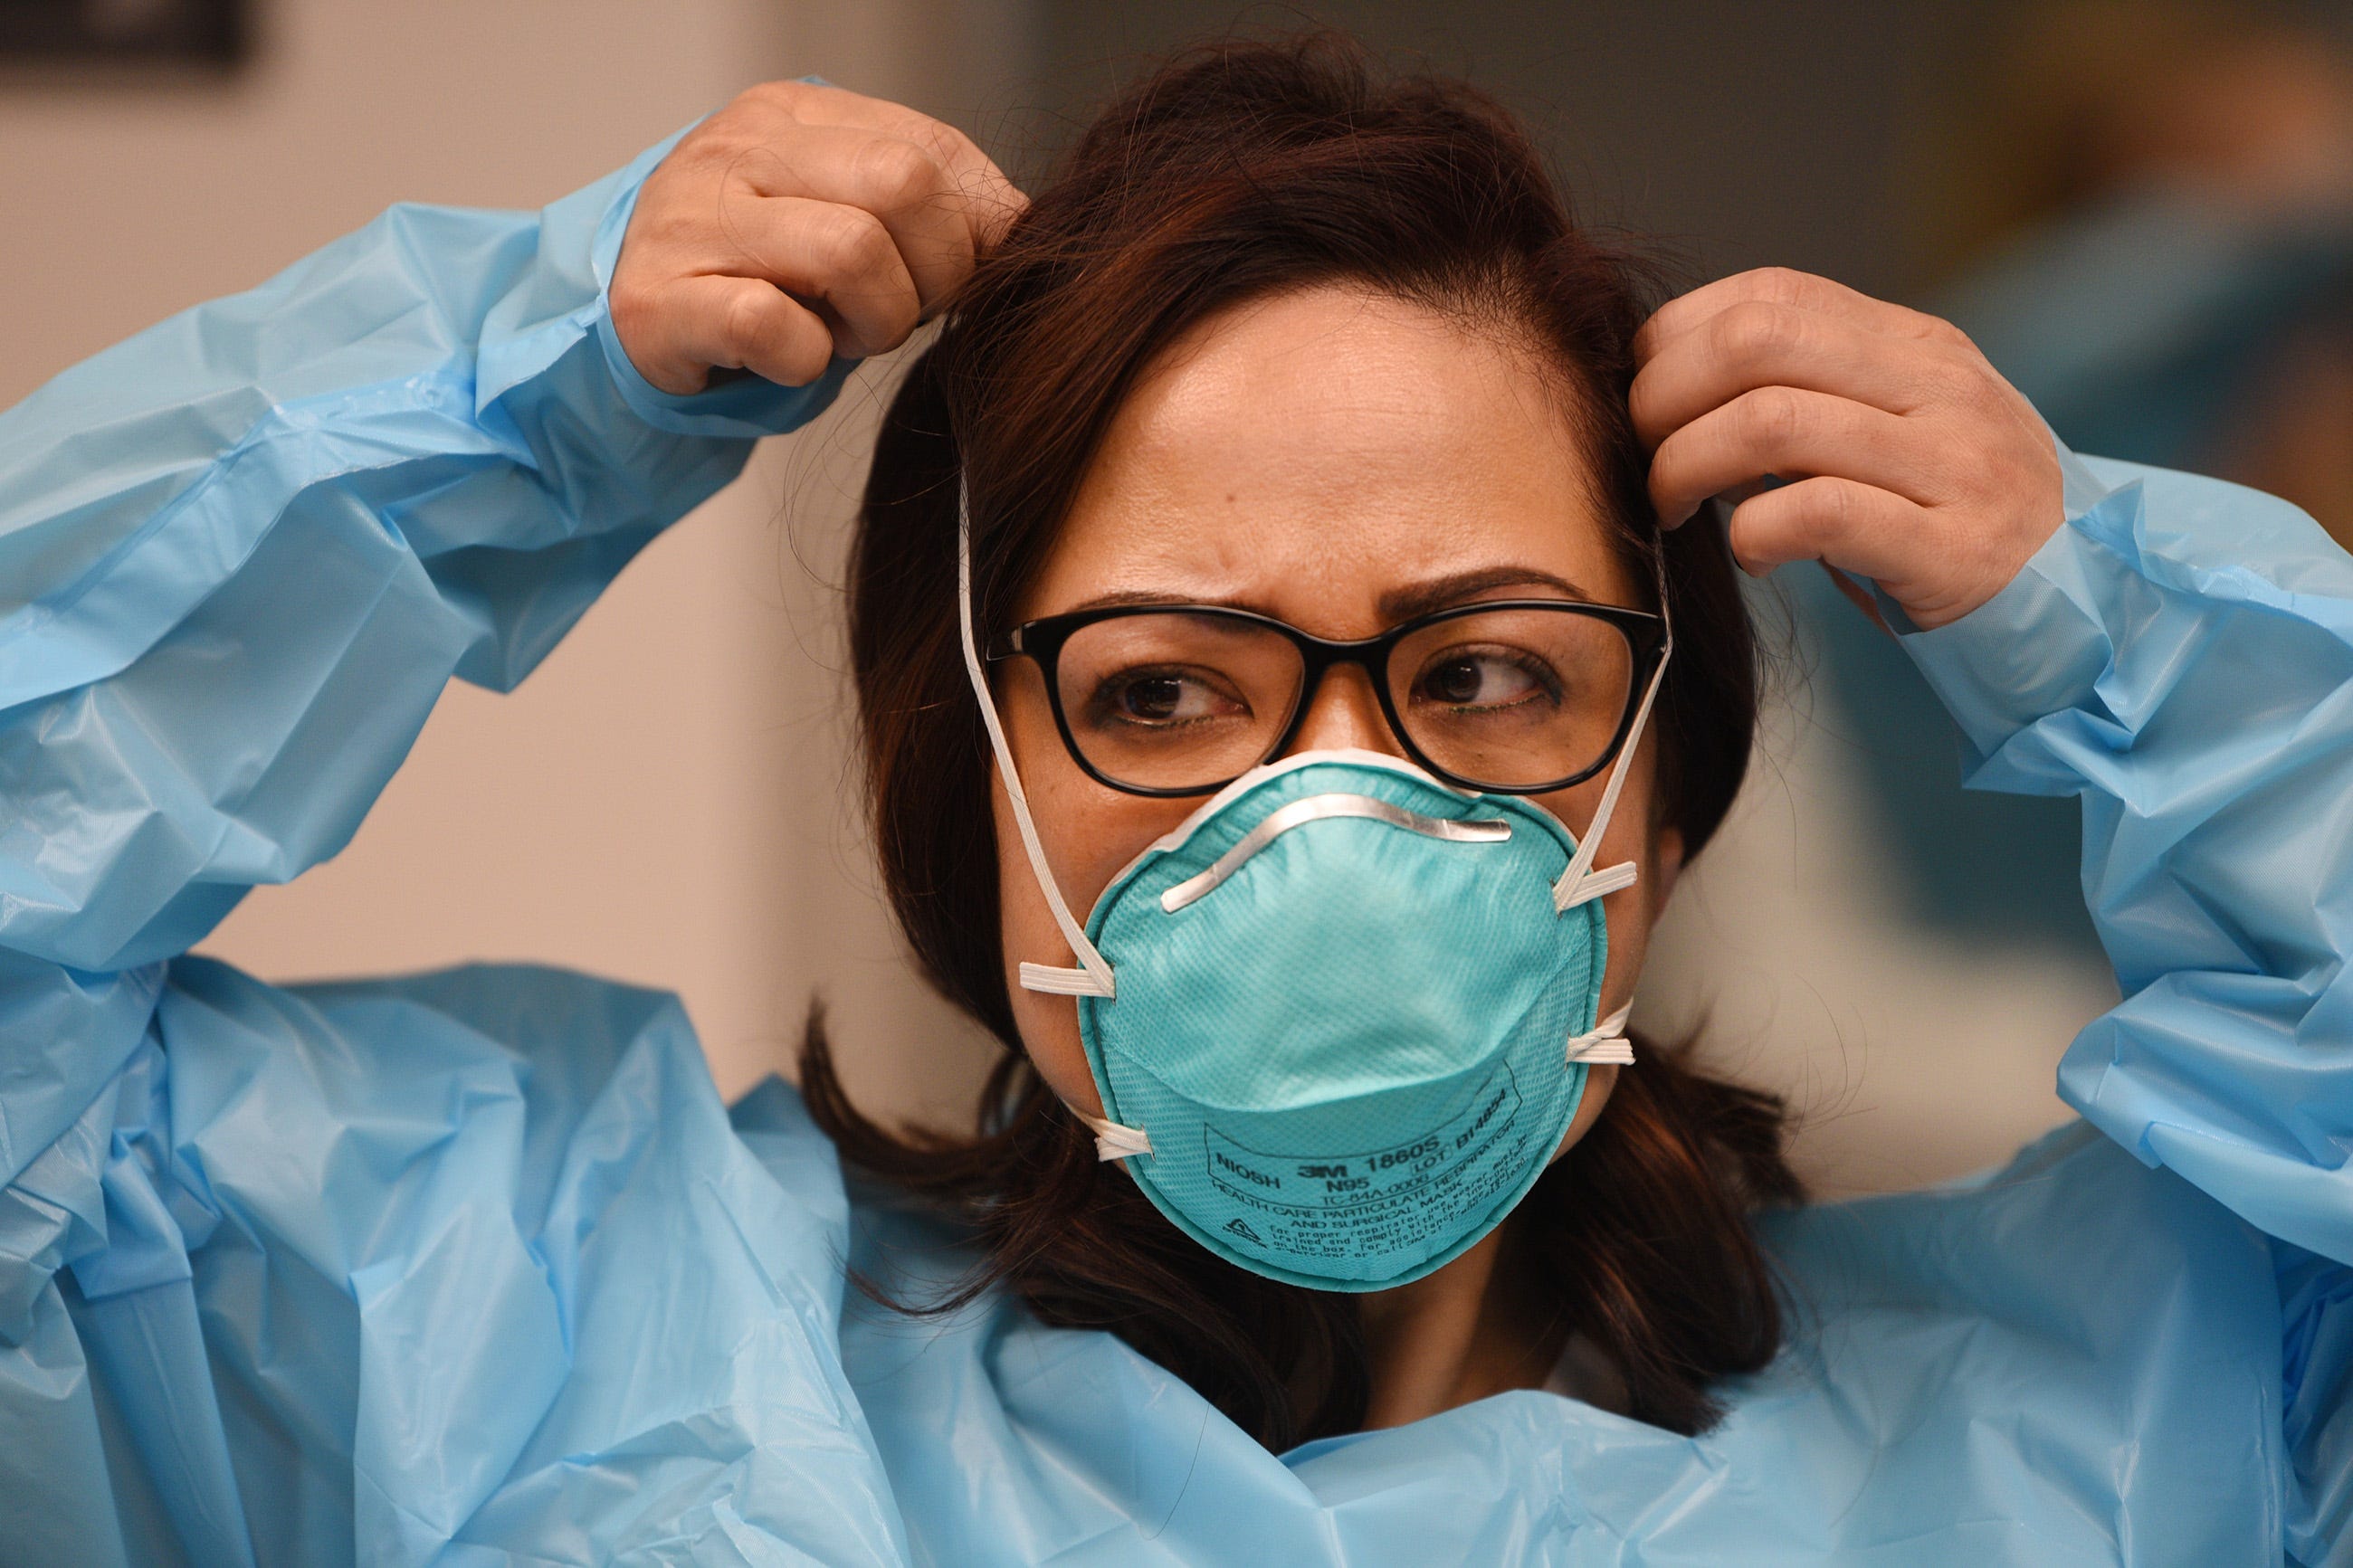 Nurse Jennifer Tempo, RN, puts on a mask during the Covid 19 Training with Personal Protective Equipment (PPE) at the hospital's simulation center at Holy Name Medical Center in Teaneck on 02/24/20. 